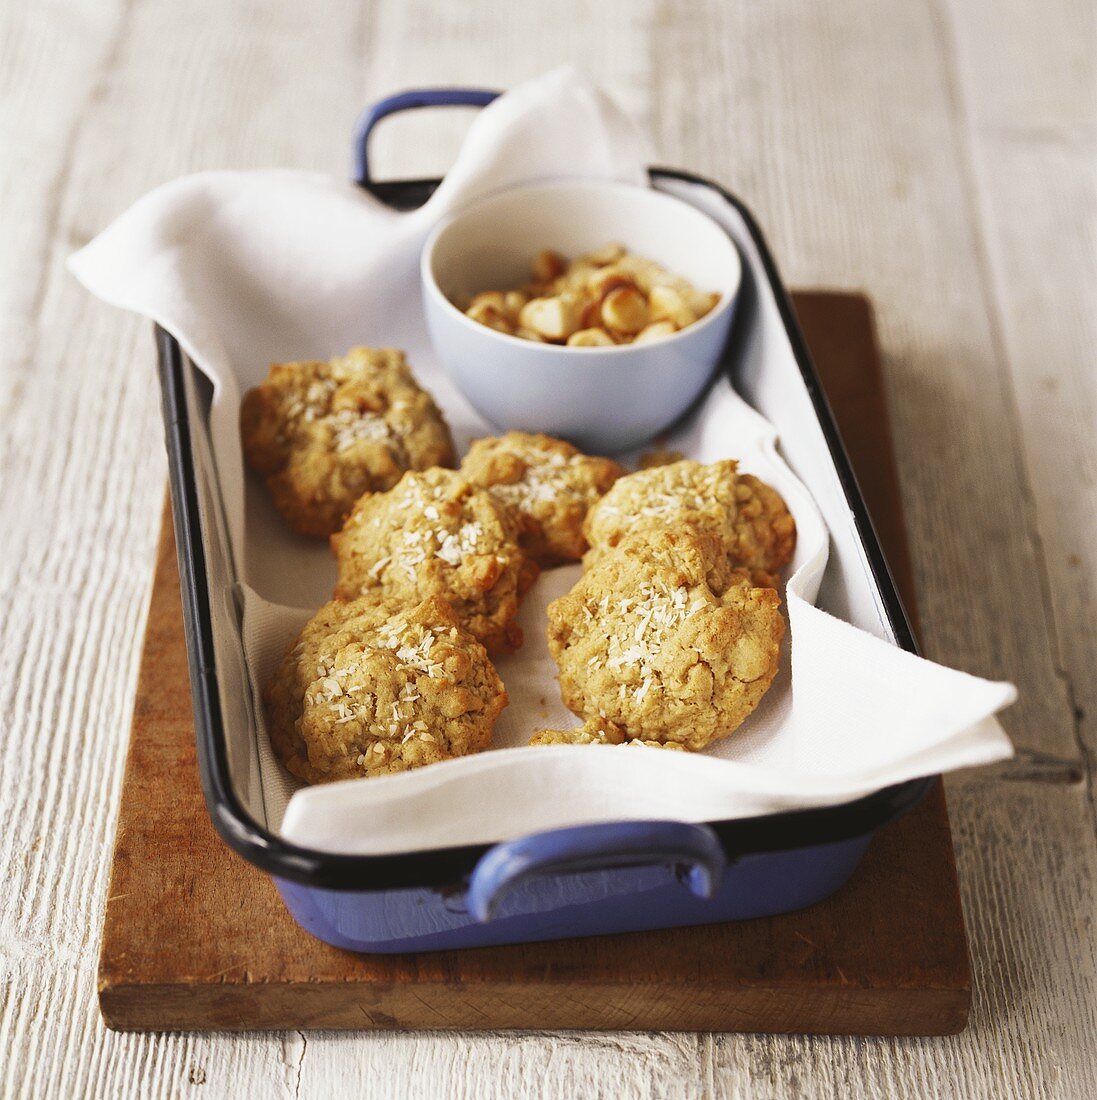 Macadamia biscuits in blue roasting tin